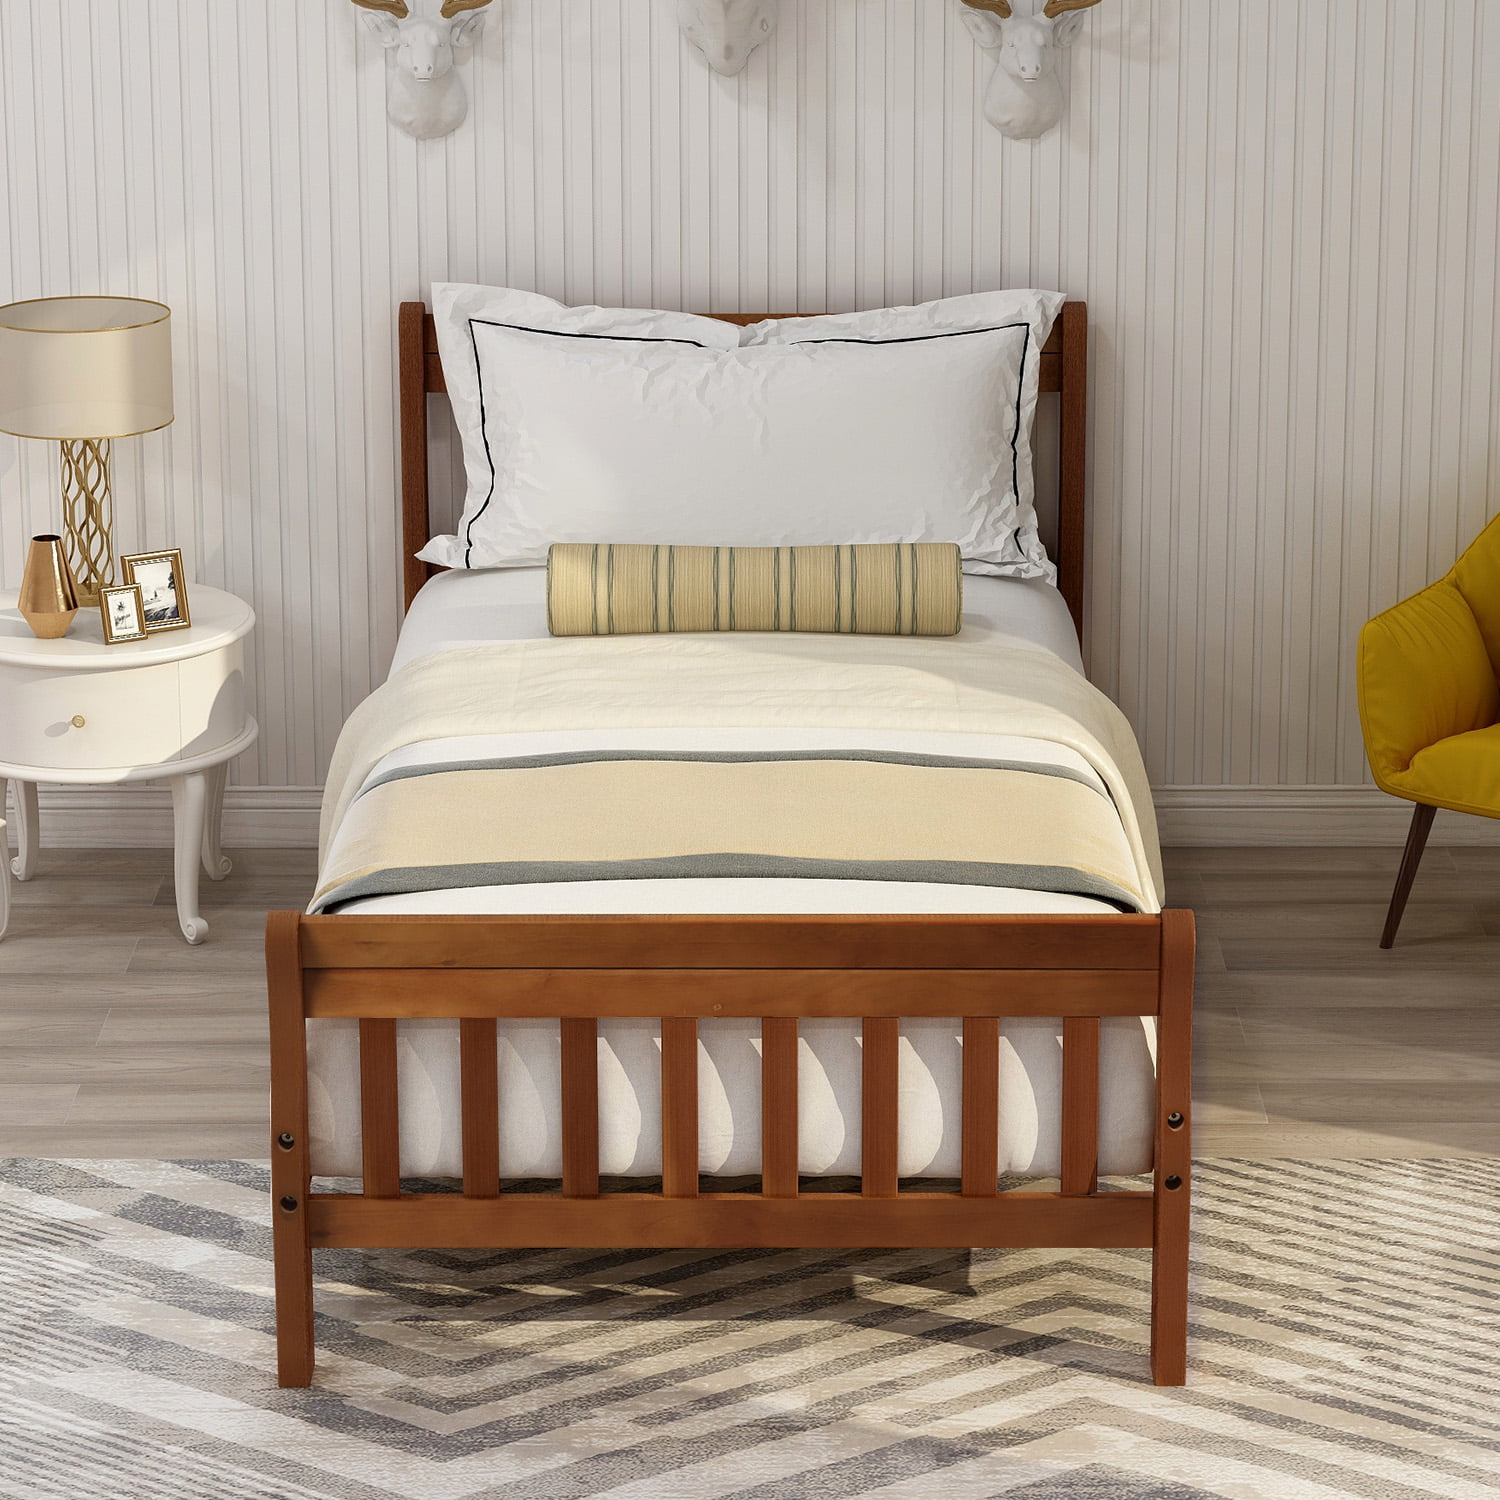 Twin Bed Frame with Headboard and Footboard, Oak Twin Bed Frame for